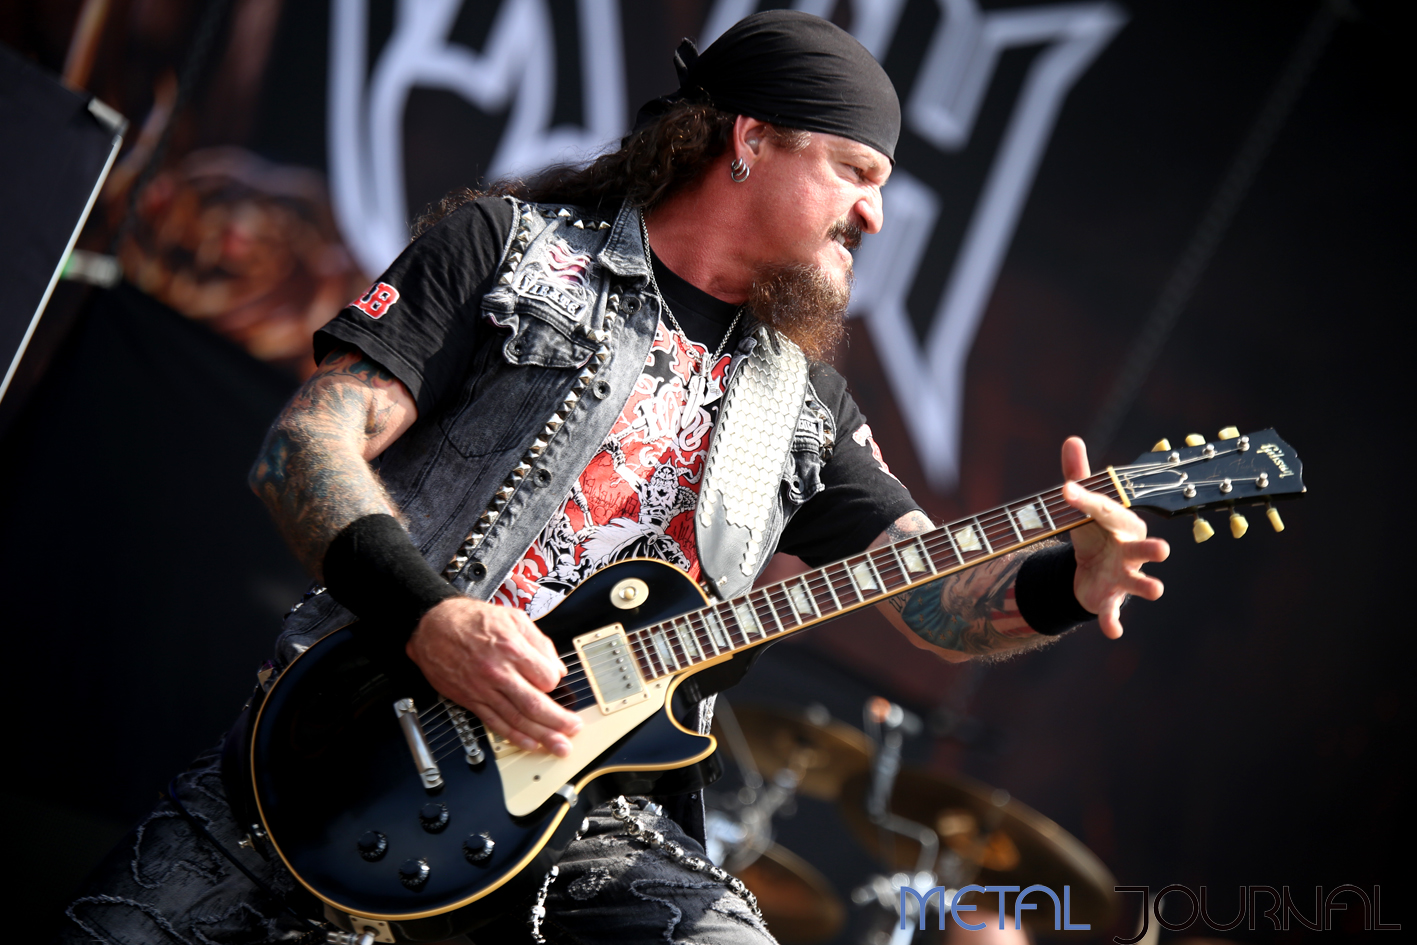 iced earth rock fest 18 - metal journal pic 1